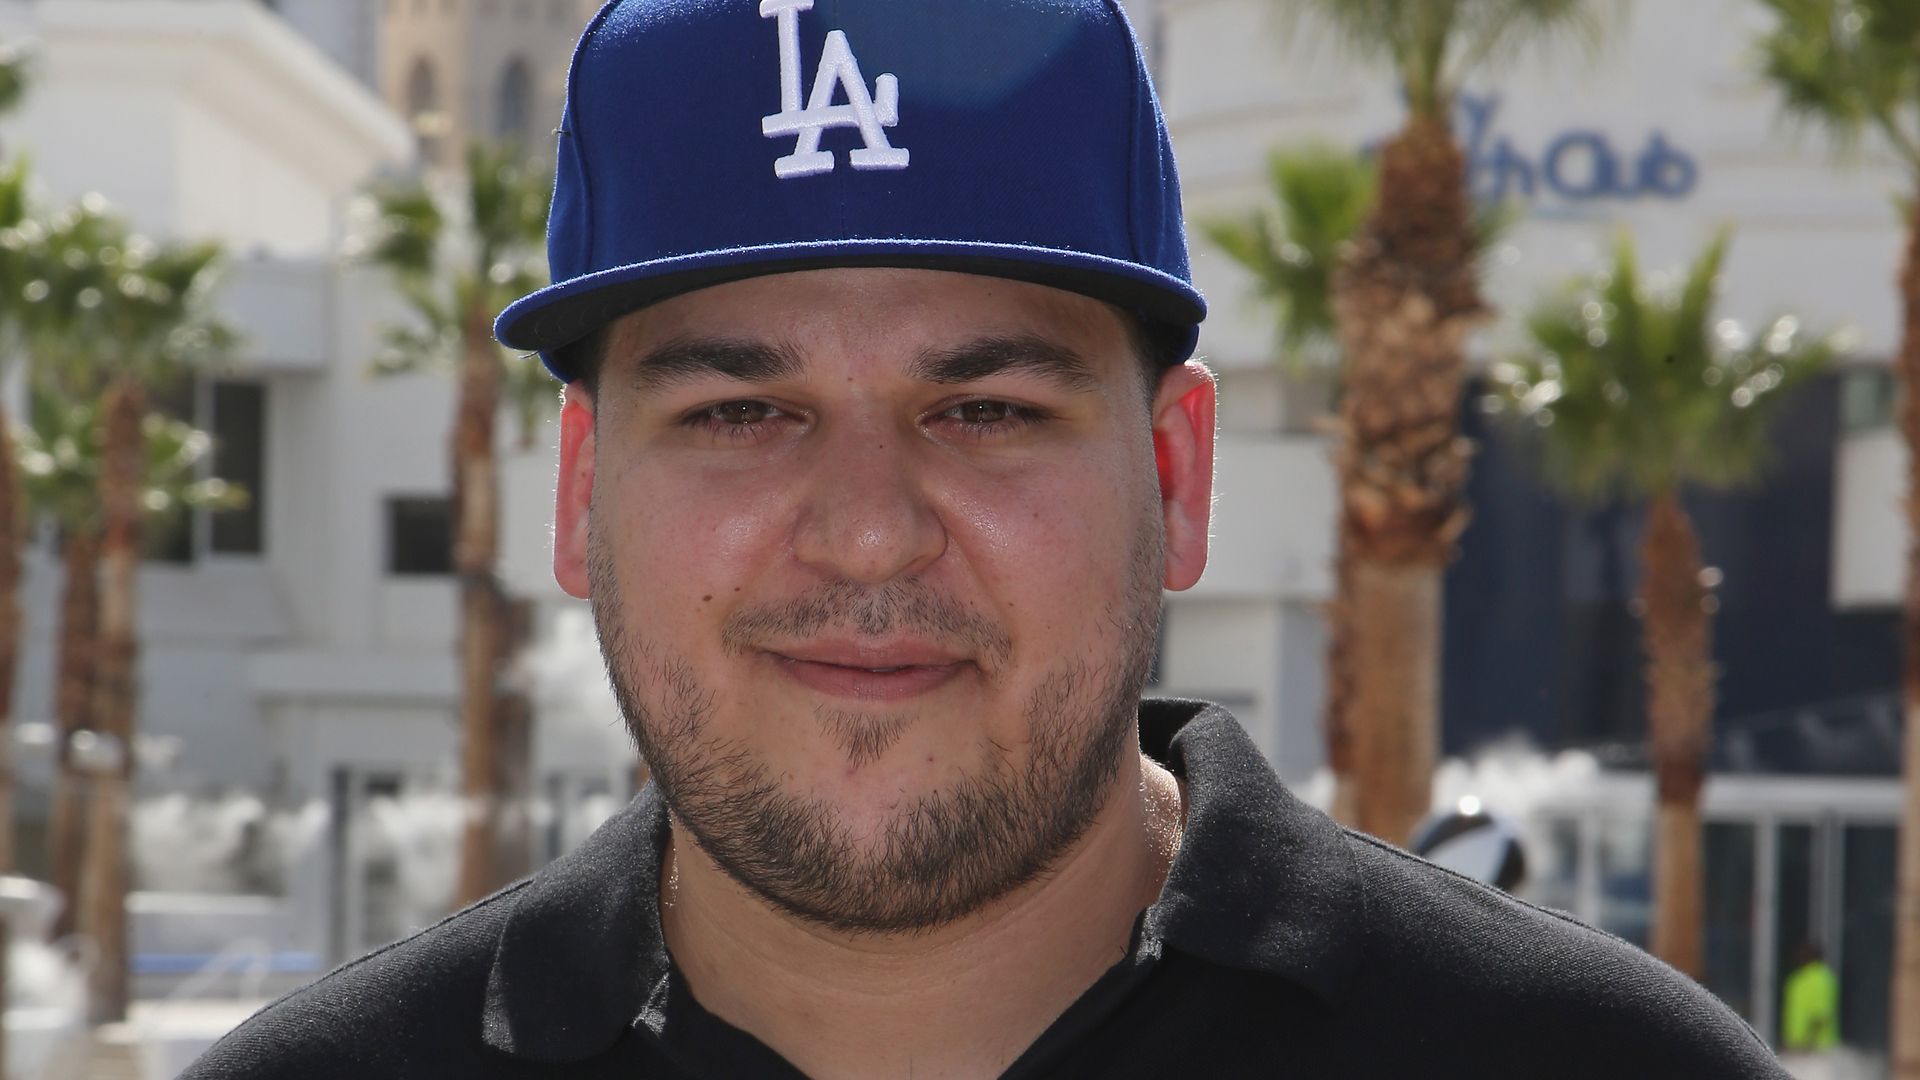 Rob Kardashian shares very rare glimpse of life with daughter Dream and her new hair